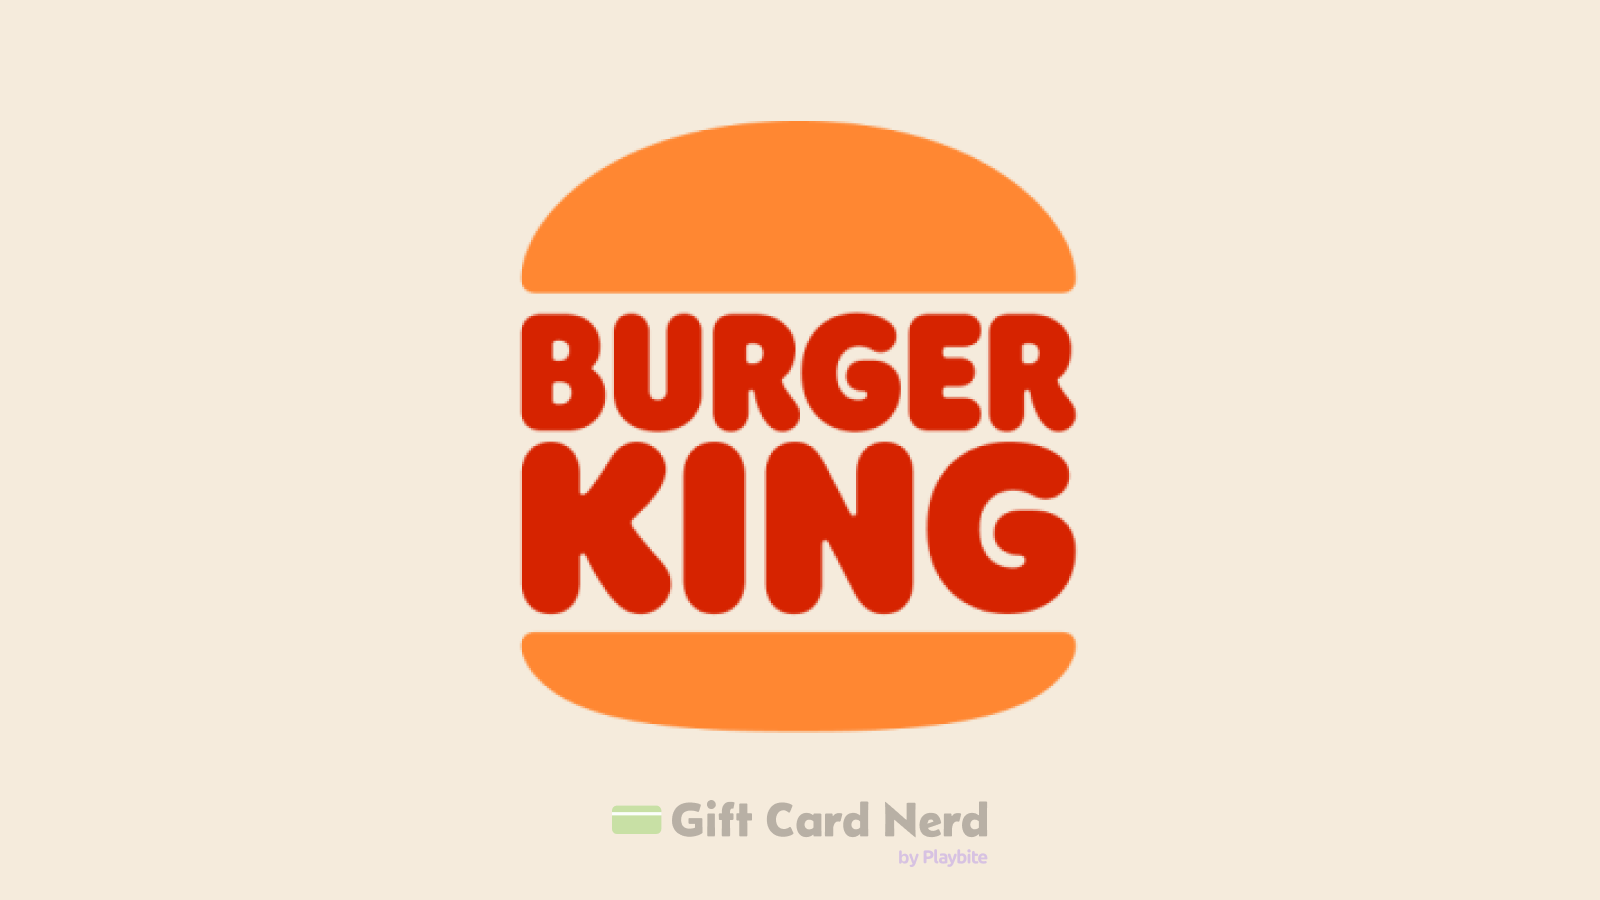 Can I Use a Burger King Gift Card on Postmates?